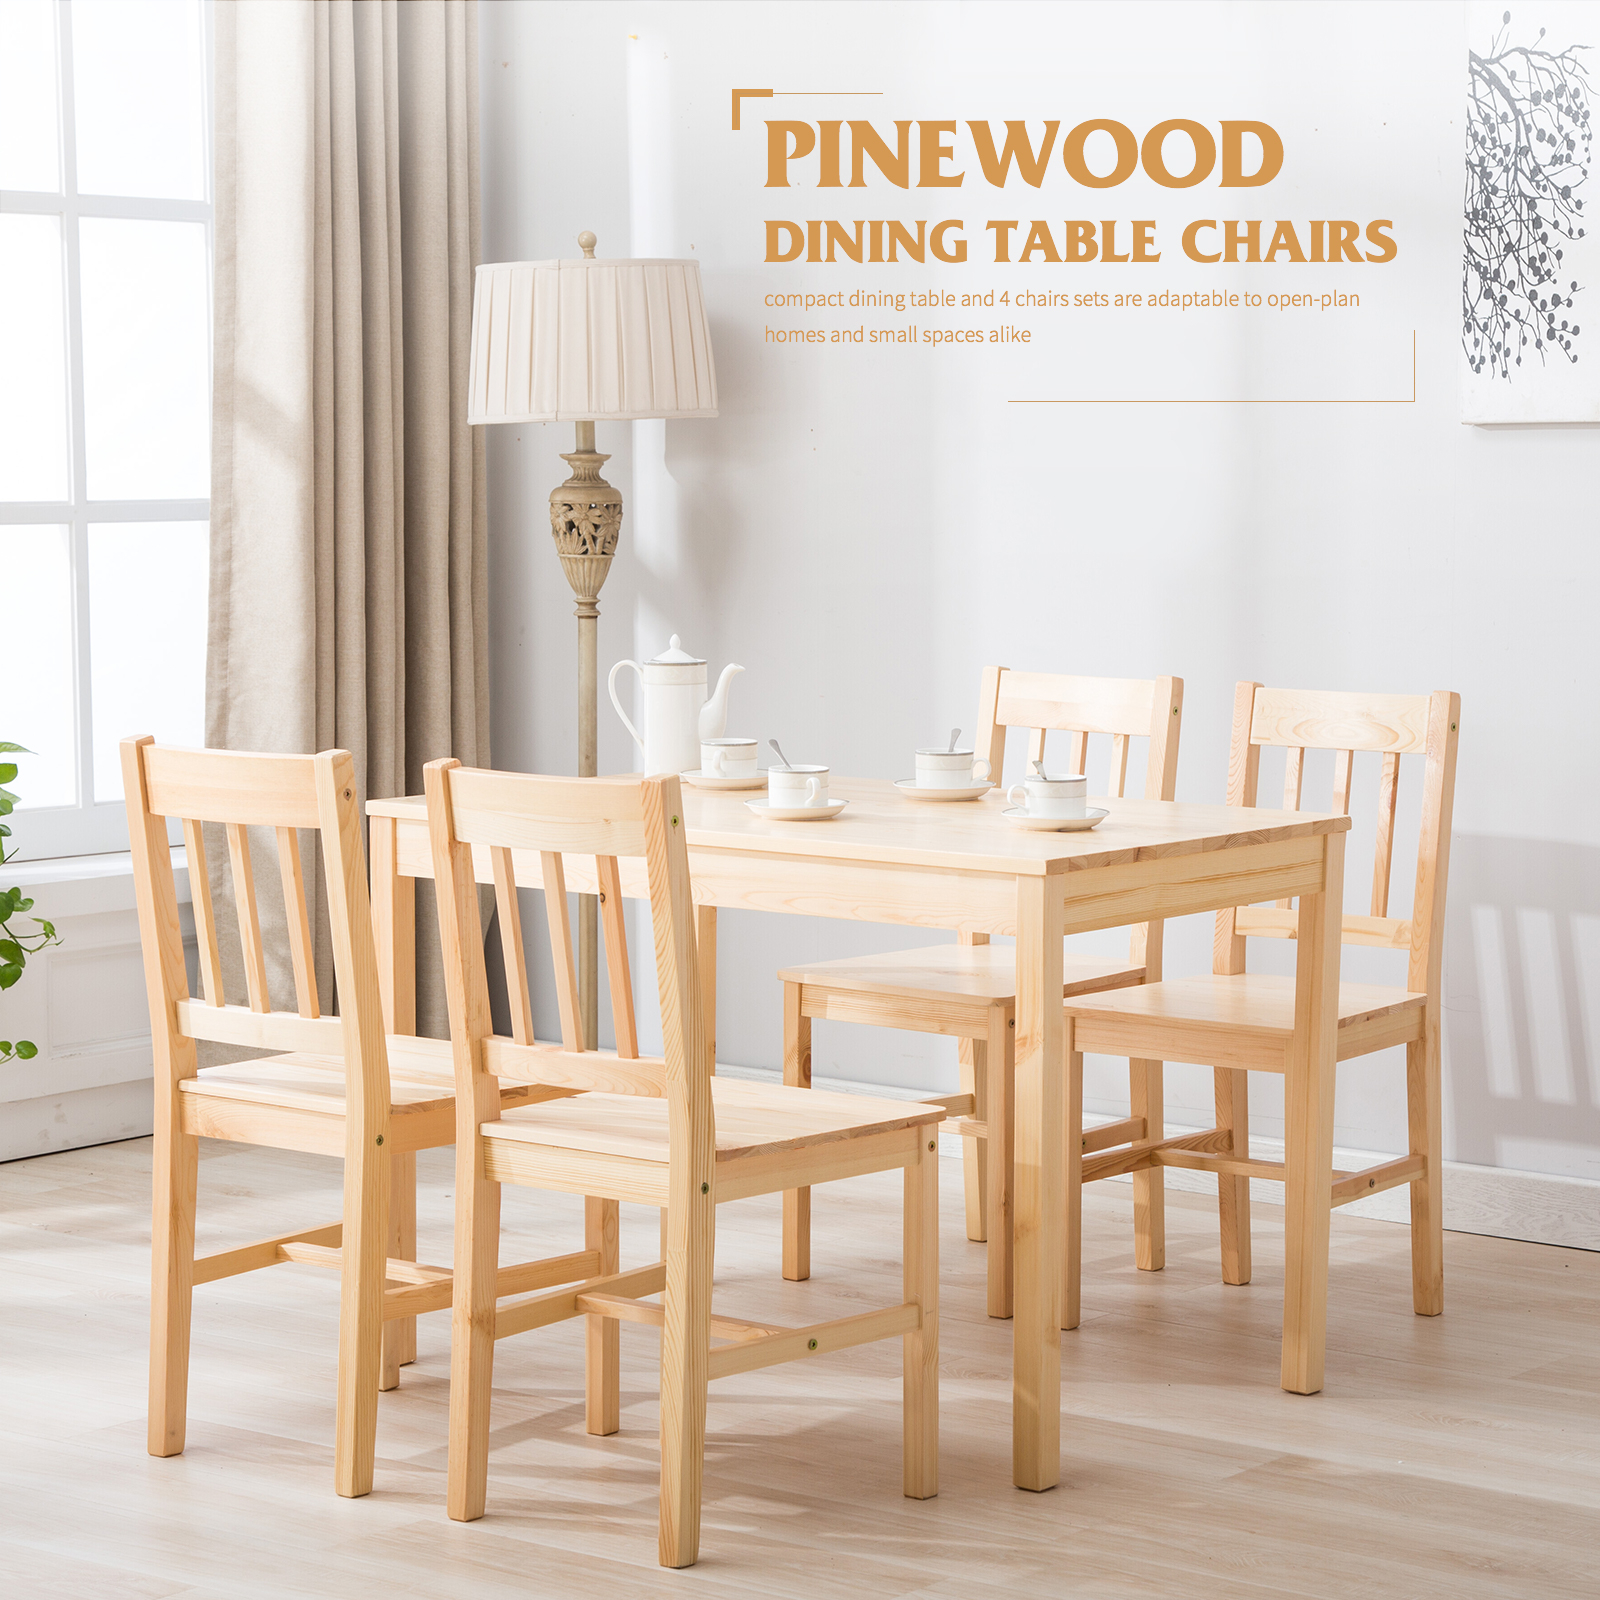 Chair Wondrous Kitchen Table And Chair Sets With in dimensions 1600 X 1600